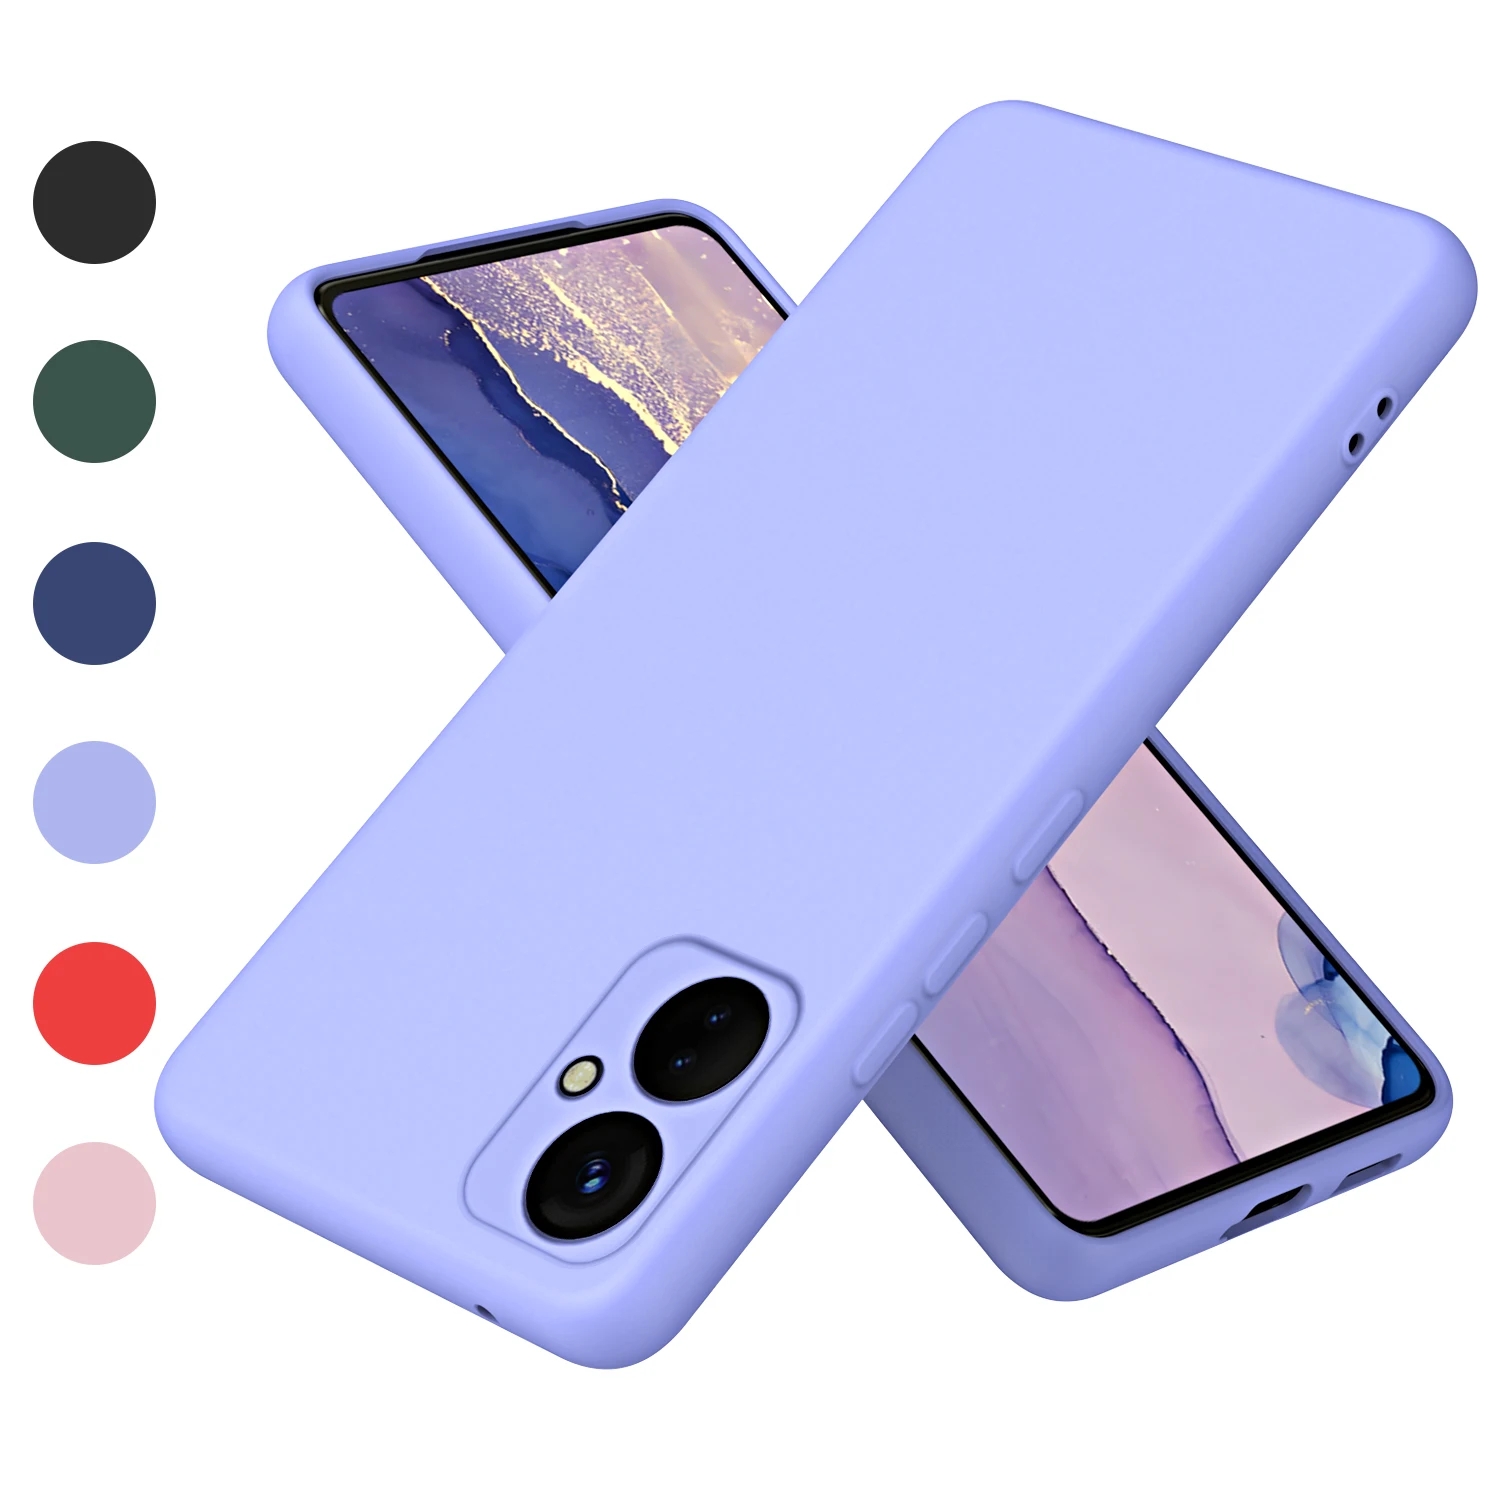 

Luxury Liquid Silicone Case For Tecno Spark 9 Pro Built In flannel Soft Edges Armor Shockproof Phone Cover Spark9Pro KH7 KH7n